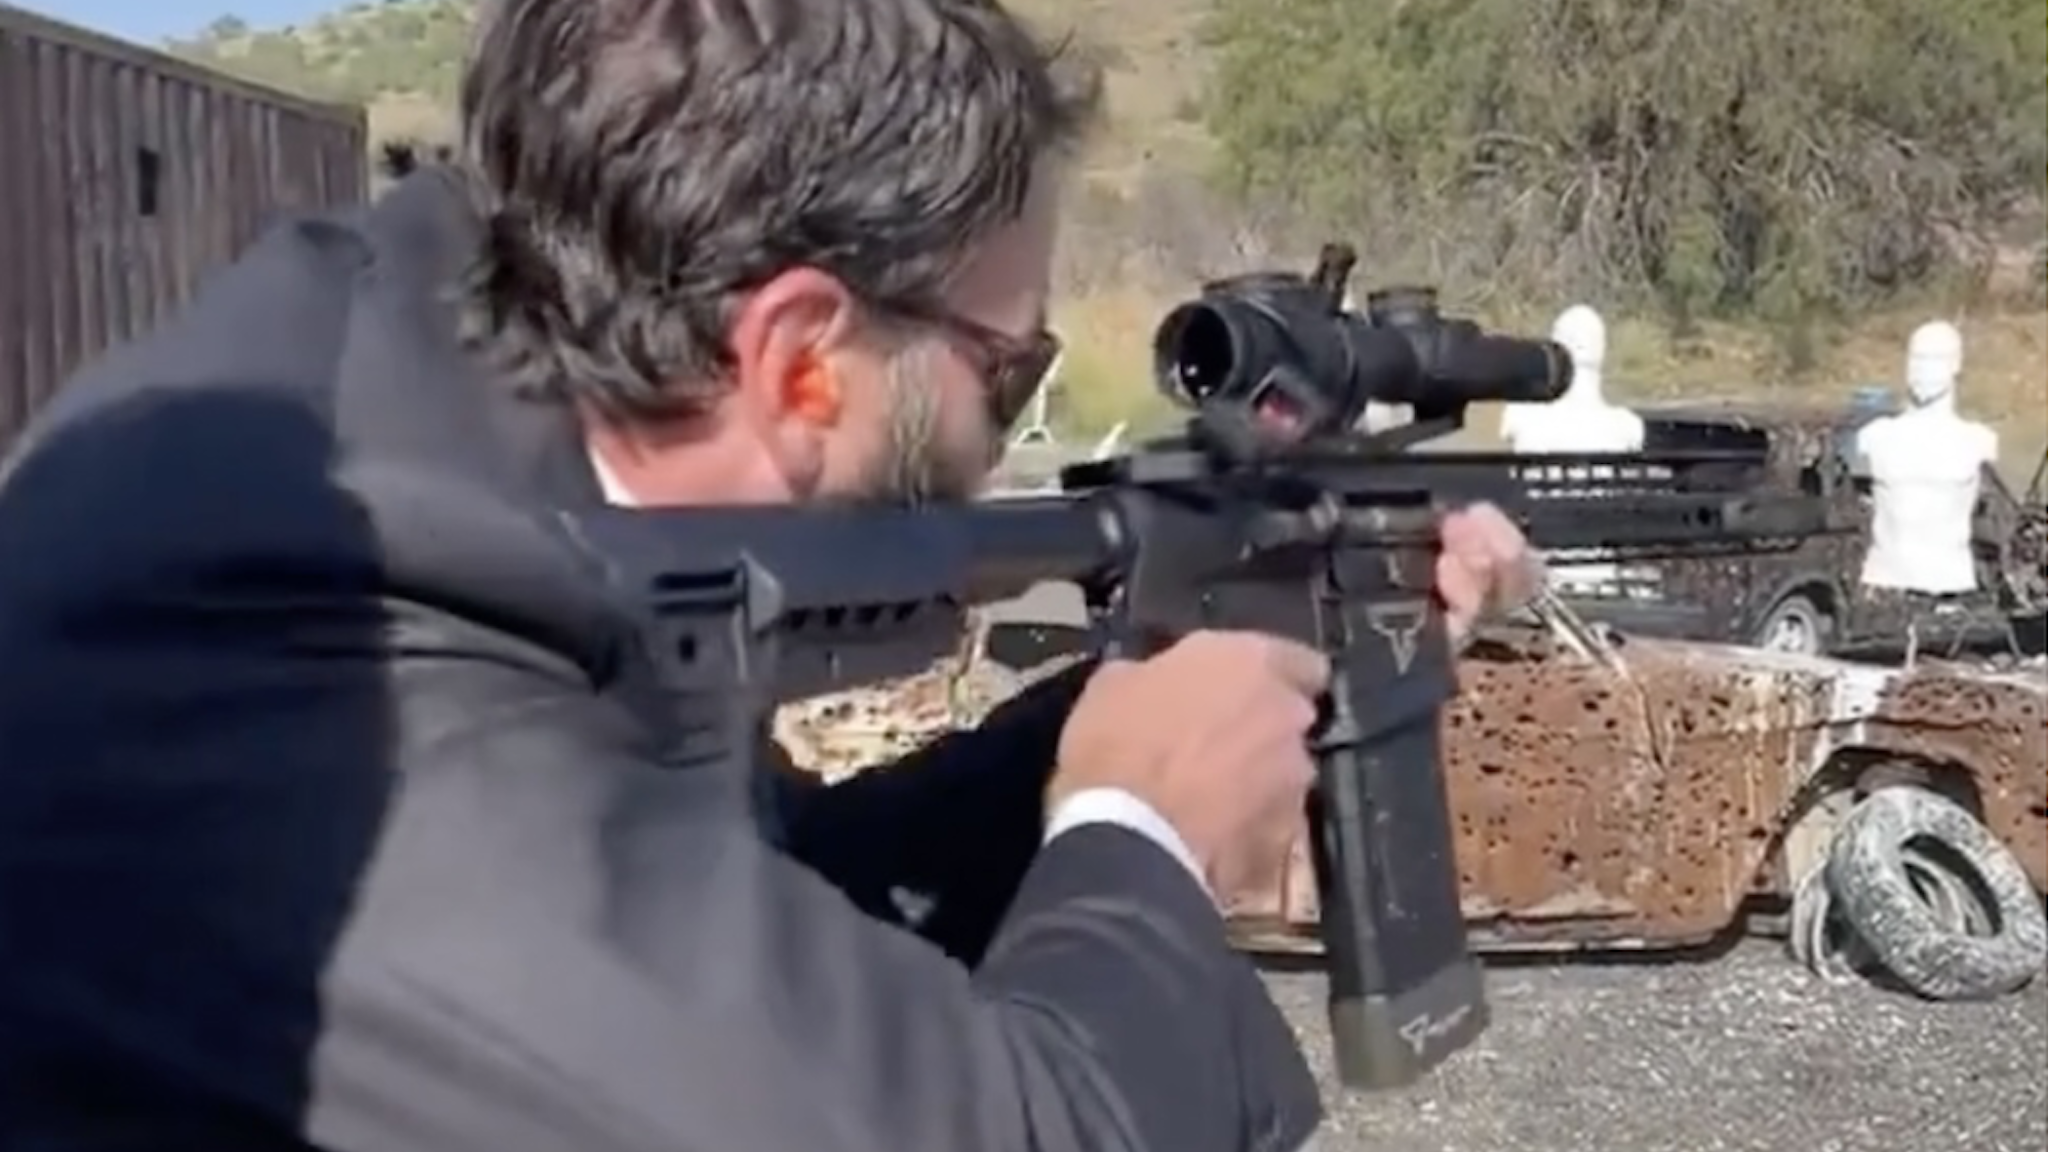 Novelist and former Navy SEAL Jack Carr put on a clinic at a California gun range.